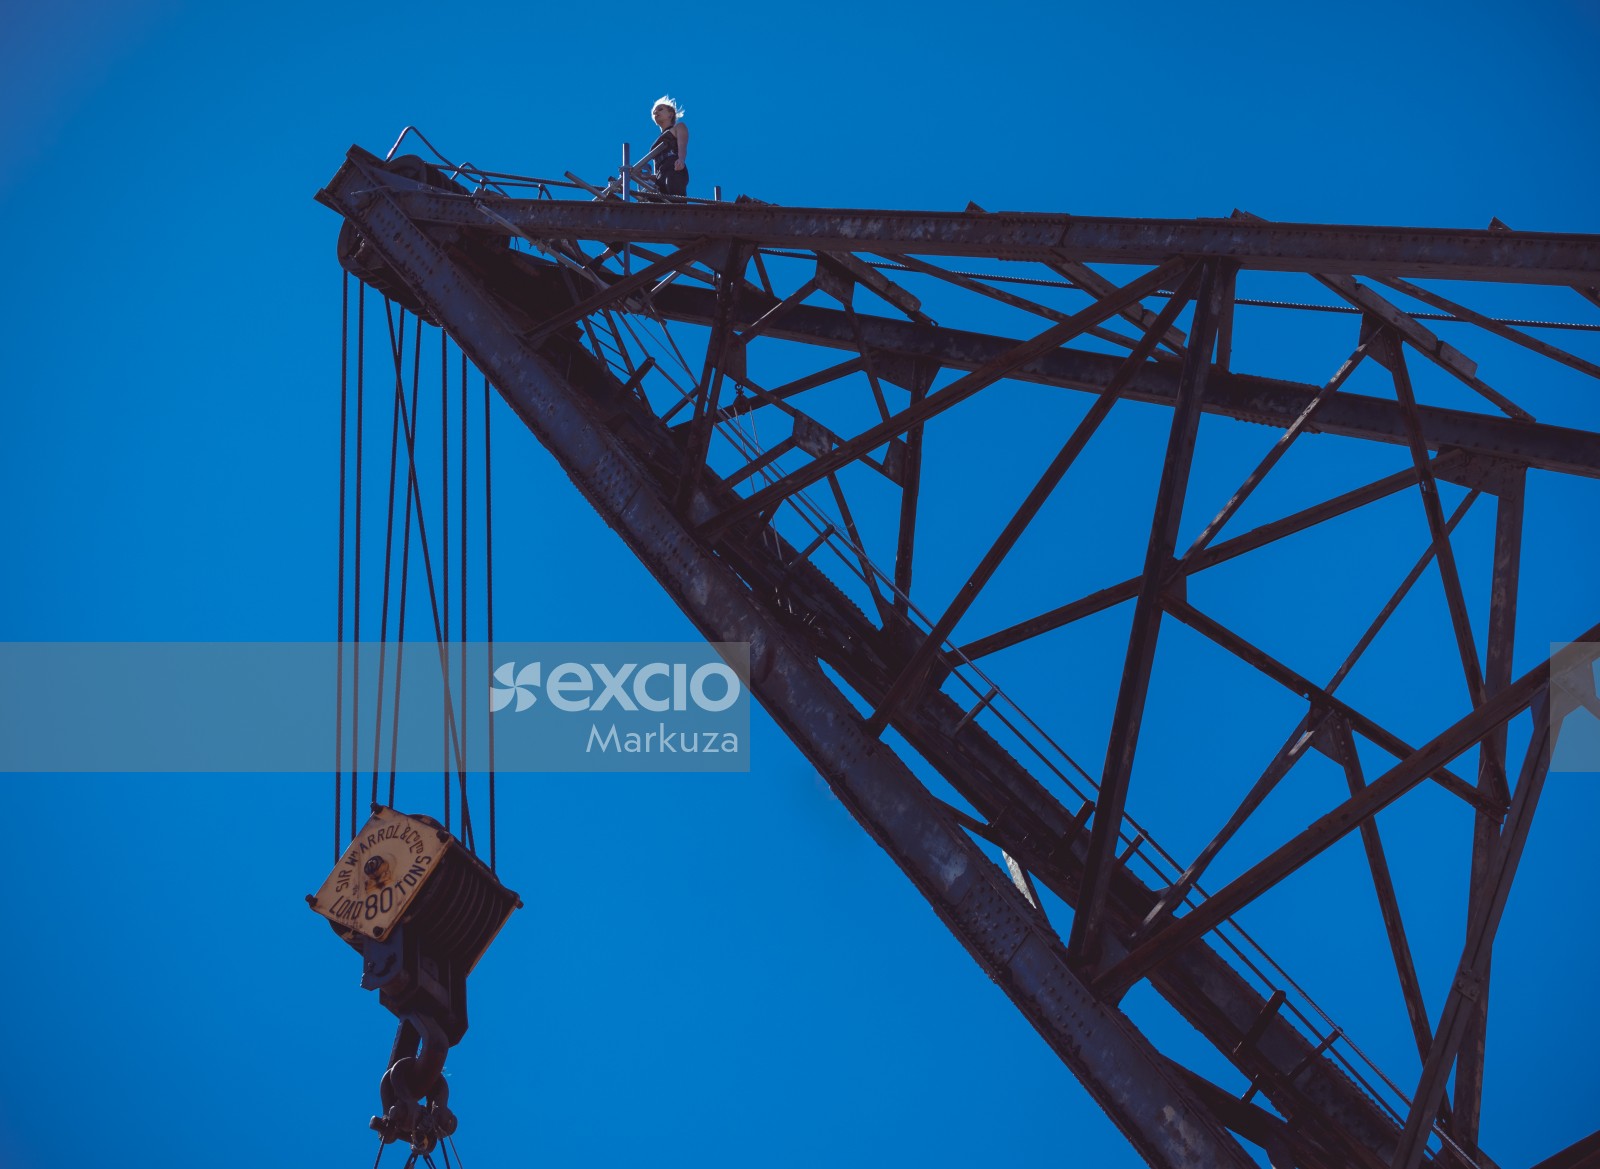 Female performer on top of a large crane